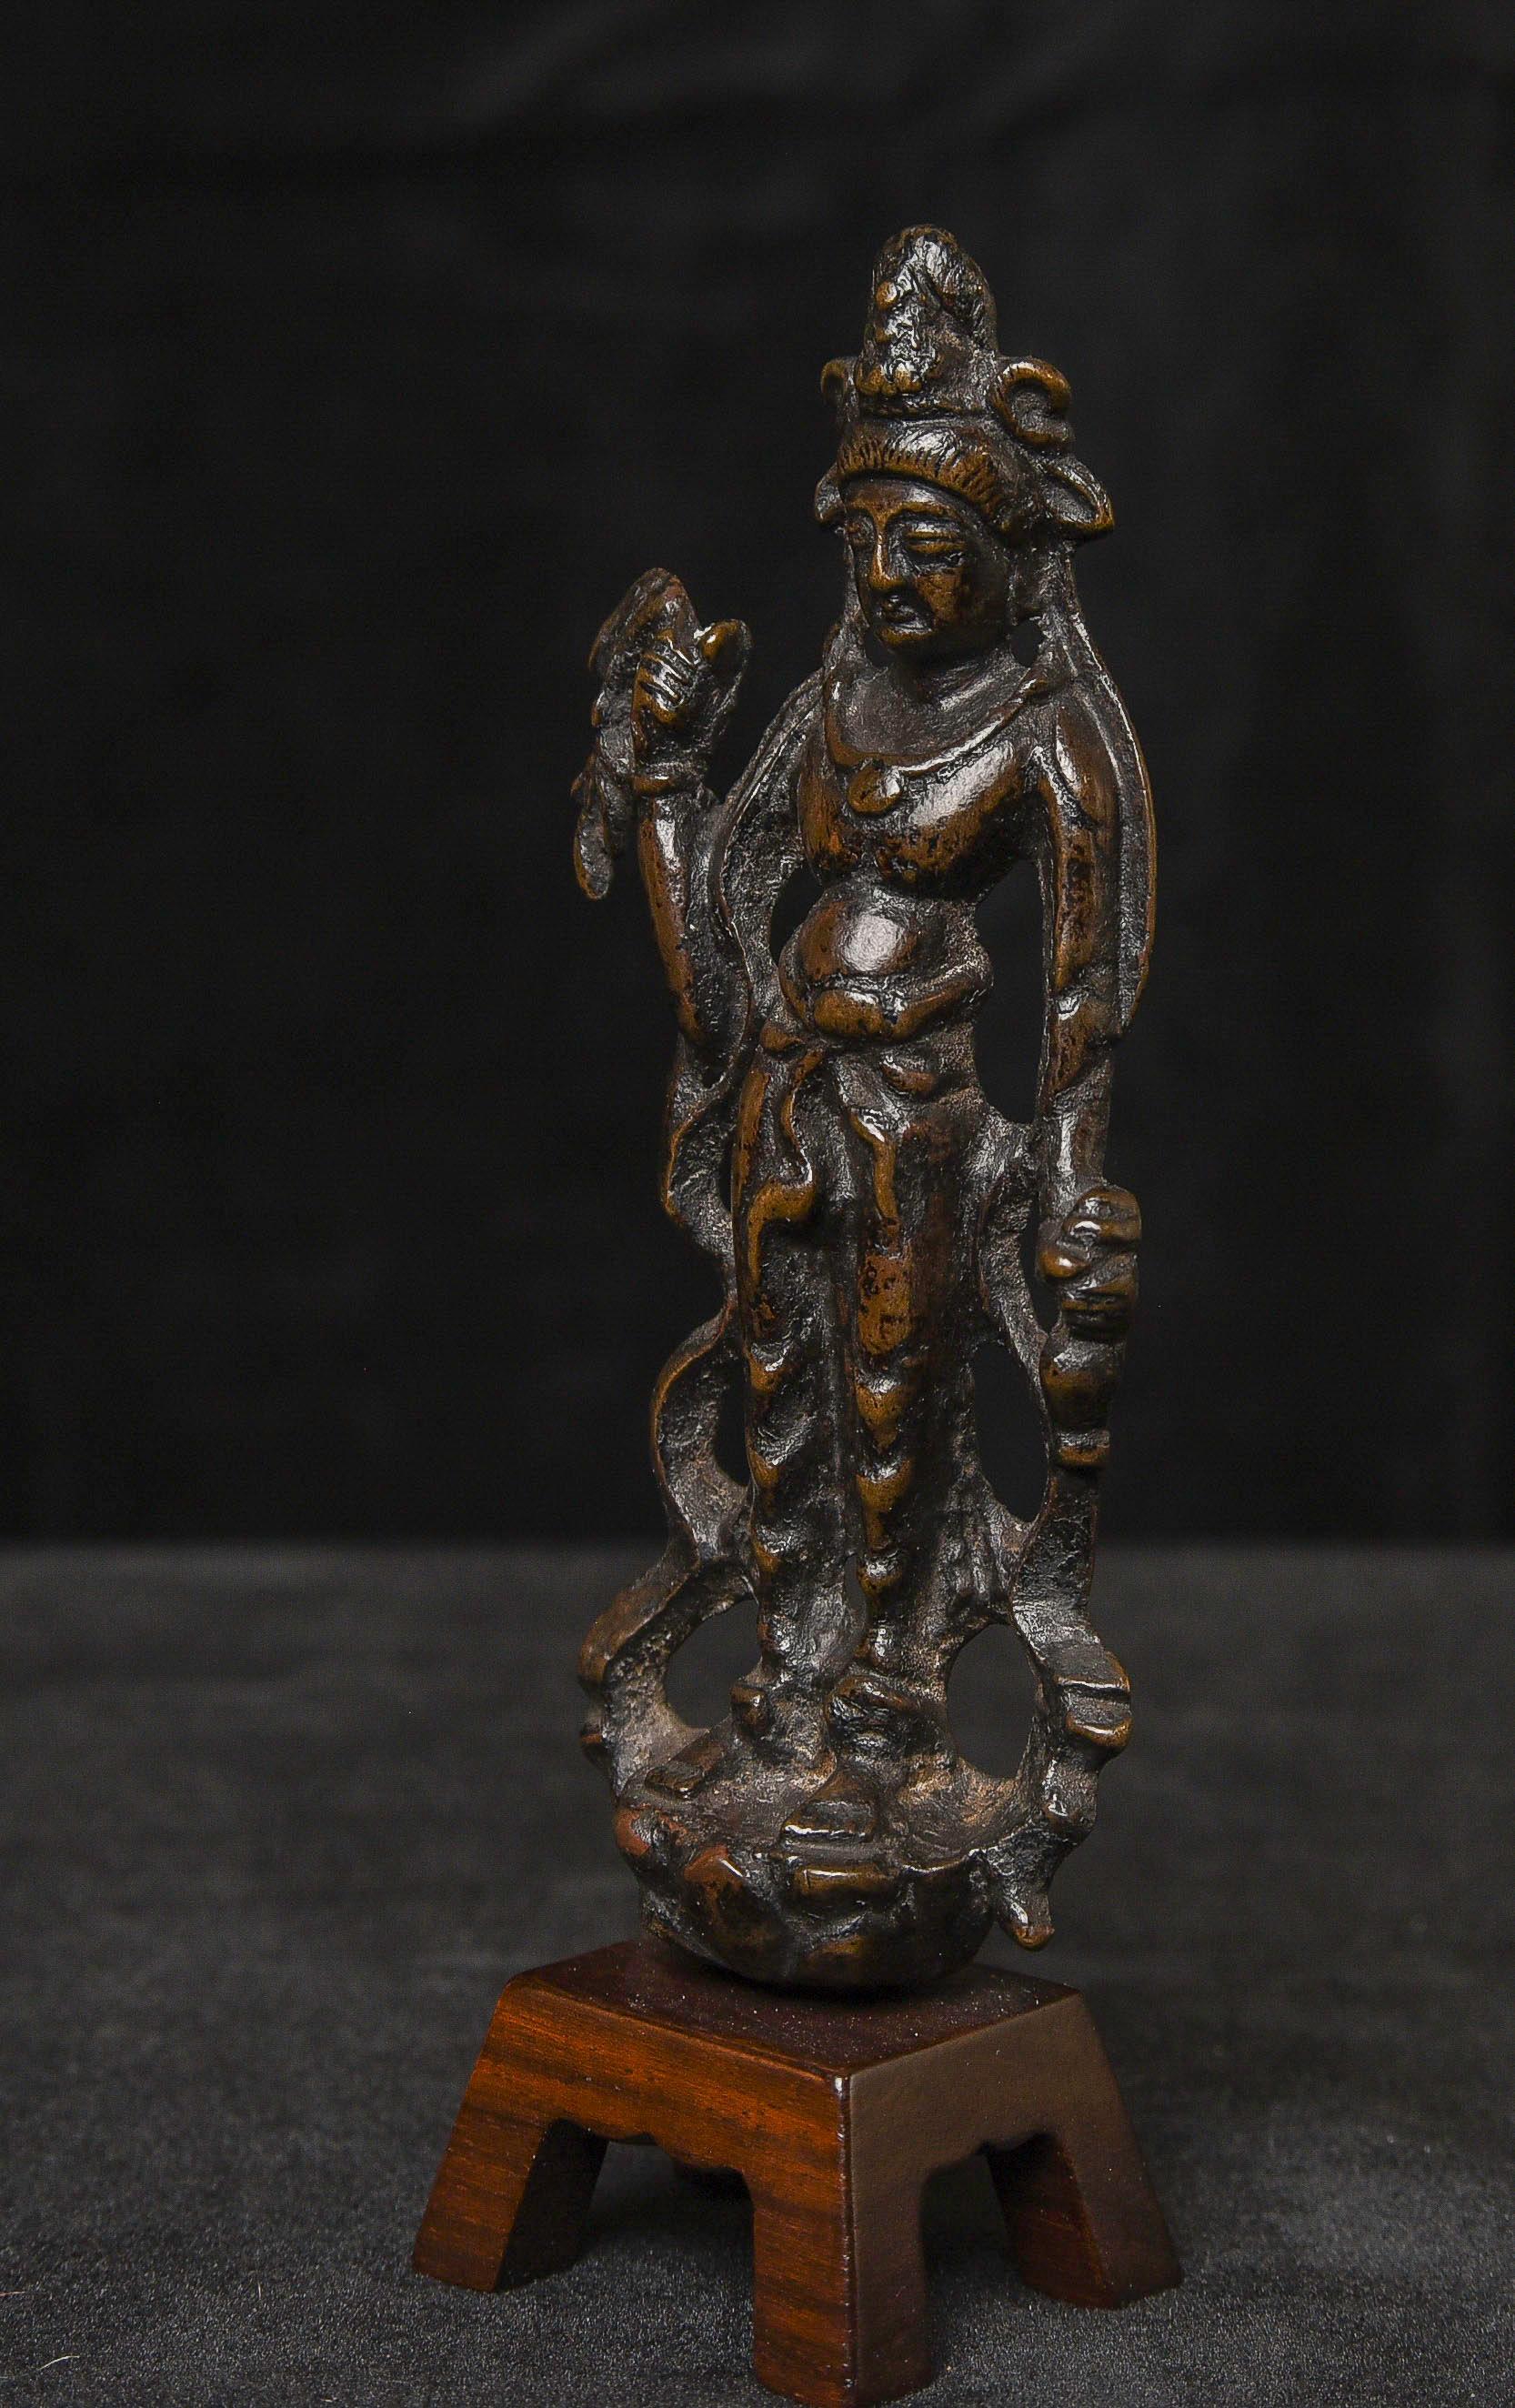  6-9th C Chinese Bronze Bodhisattva of Compassion from the Tang Dynasty - 9685 For Sale 1